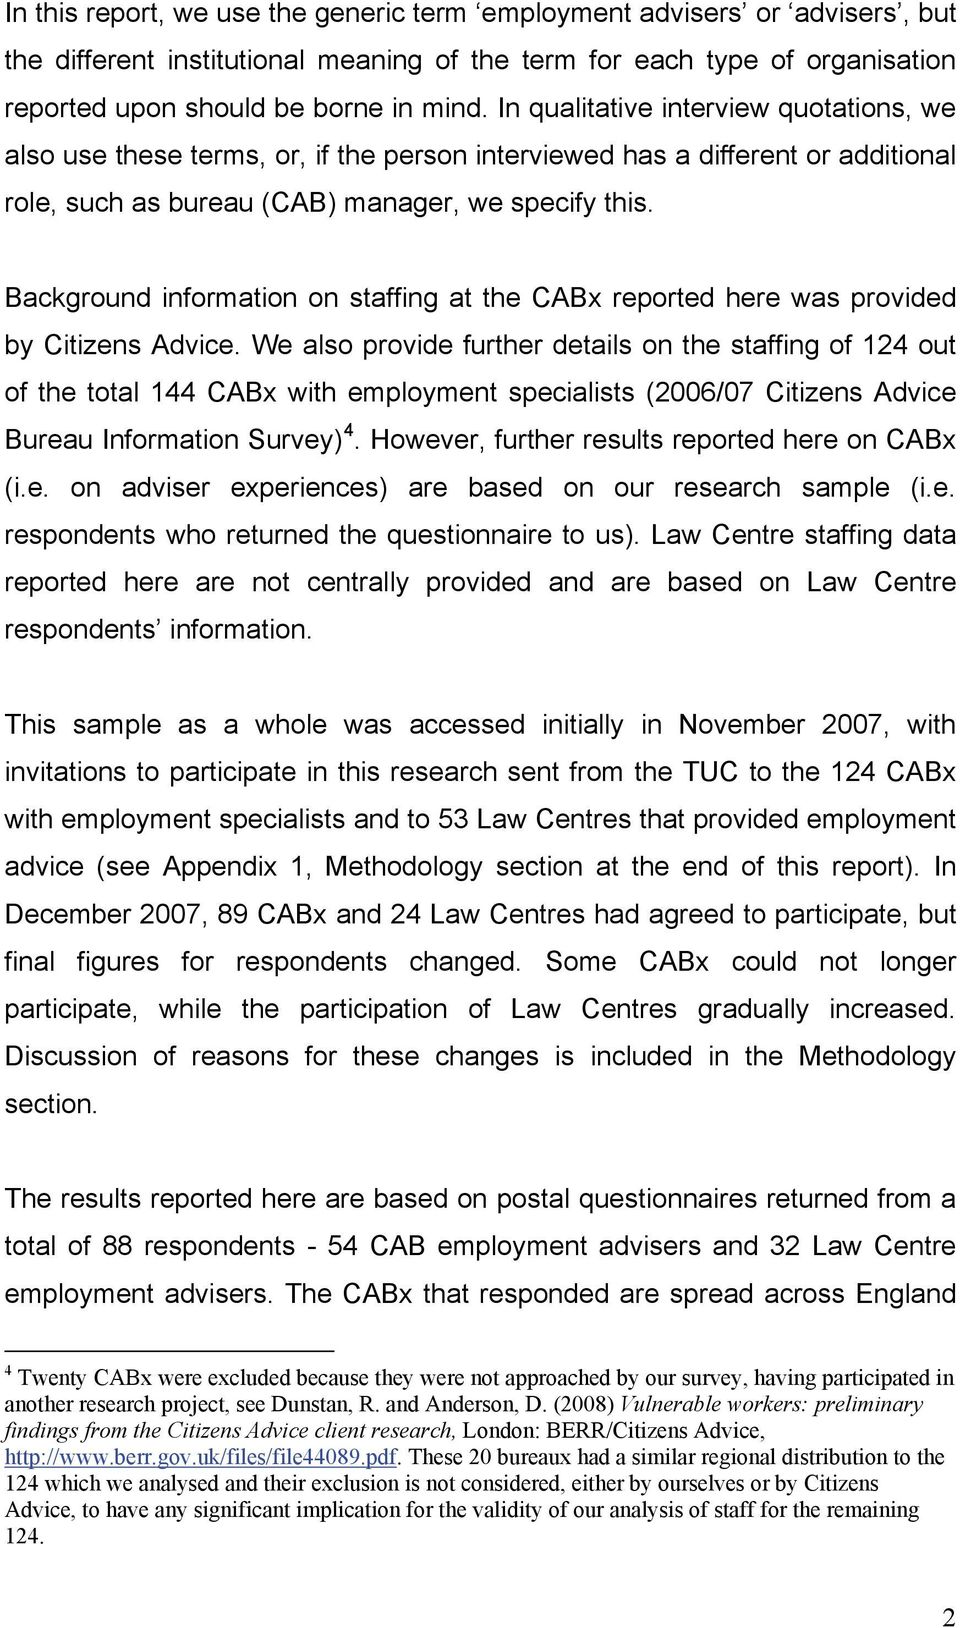 Background information on staffing at the CABx reported here was provided by Citizens Advice.